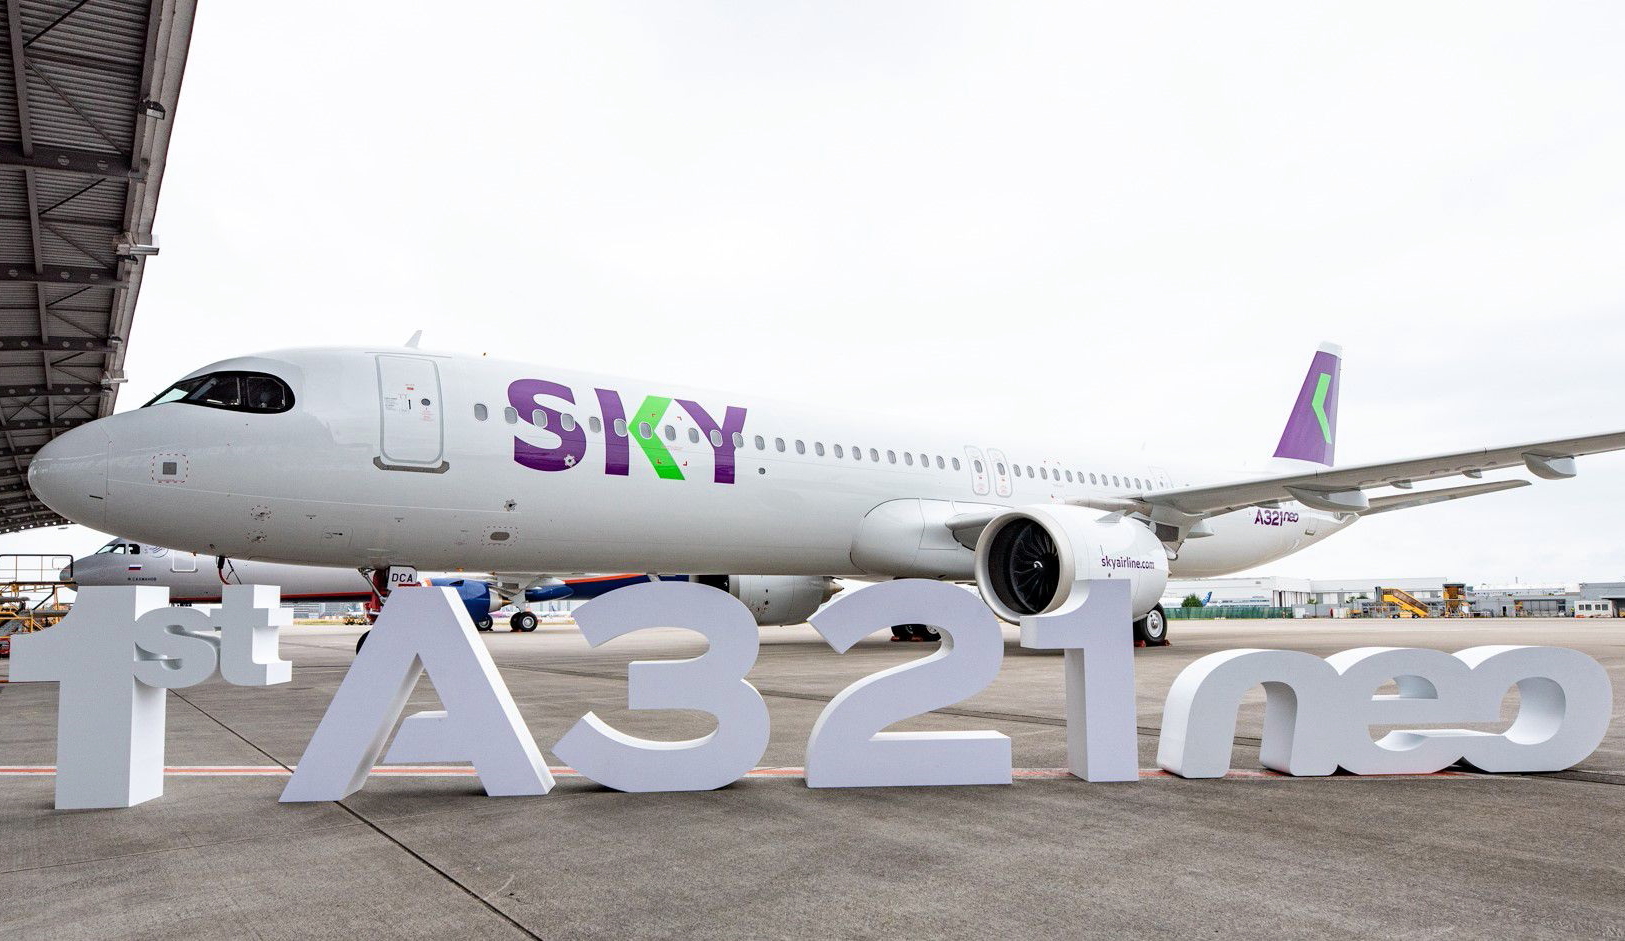 SKY, a low-cost carrier based in Chile, has taken delivery of its first A321neo leased from Air Lease Corporation. SKY is the first airline in Chile to operate the A321neo and the first in South America to operate the plane with a high density cabin configuration. Click to enlarge.